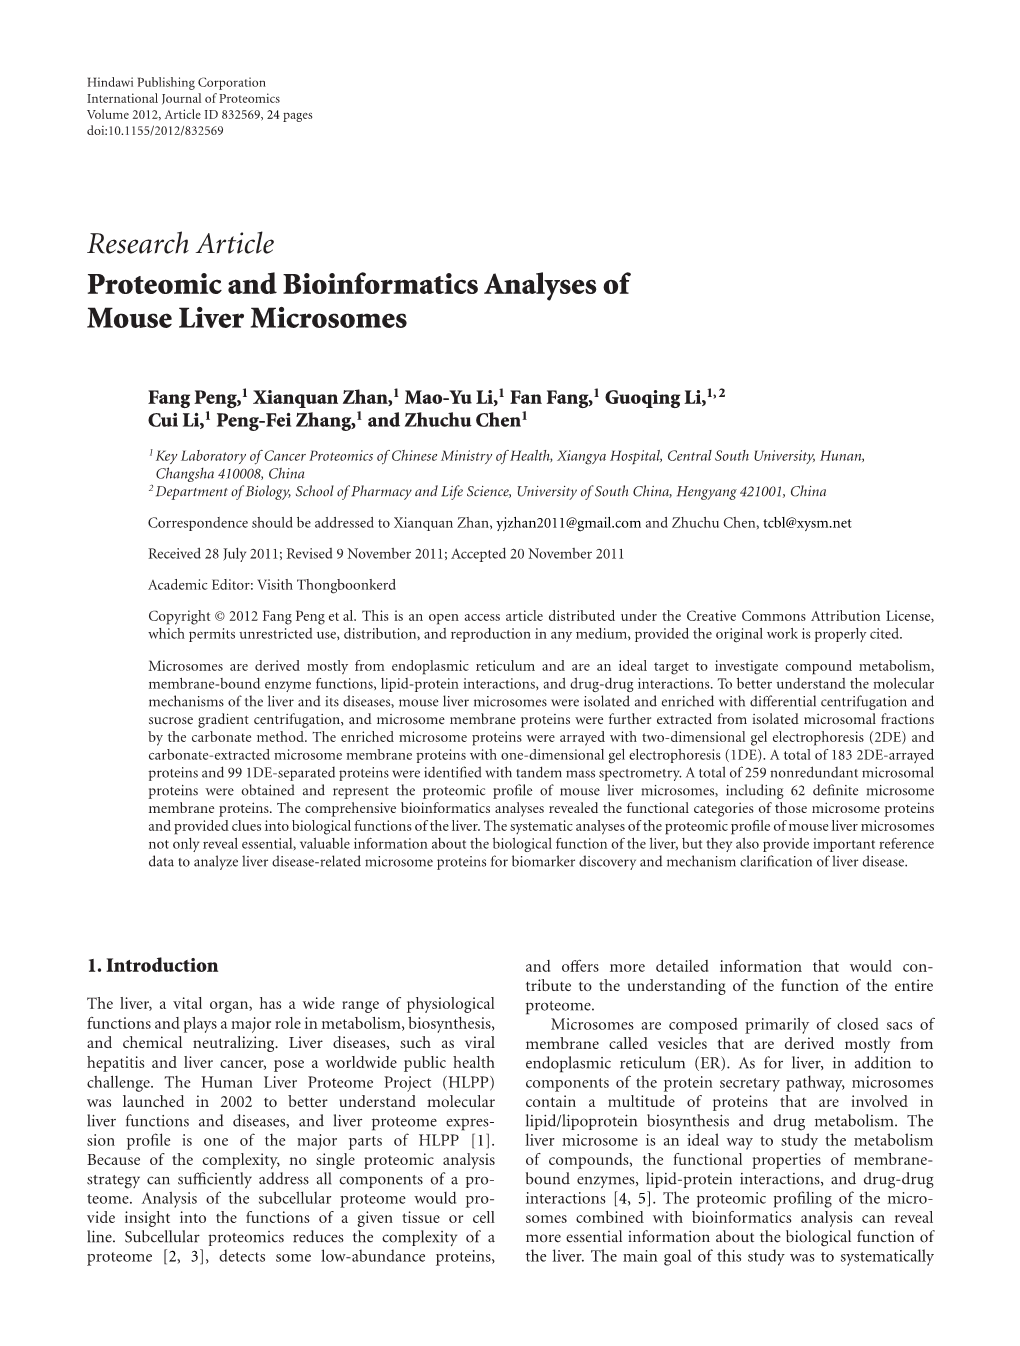 Proteomic and Bioinformatics Analyses of Mouse Liver Microsomes